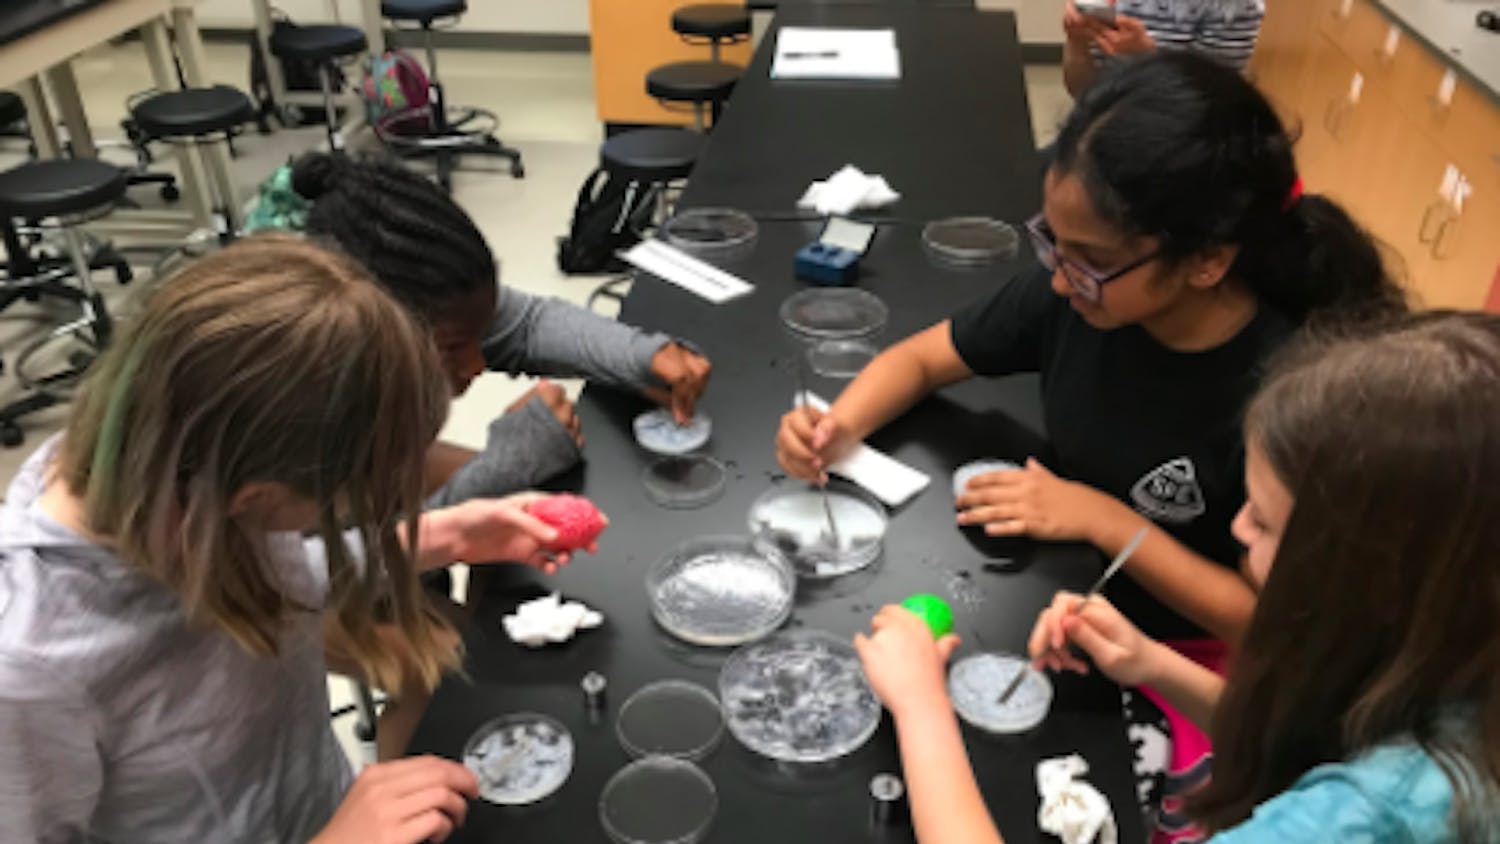 Sasha Brown, 12, Alana Keller, 11, Maggie Klein, 12 and Khushi Patel, 11, are middle school girls learning about brain phantoms, which are a material that have specific characteristics to the brain tissue.
&nbsp;